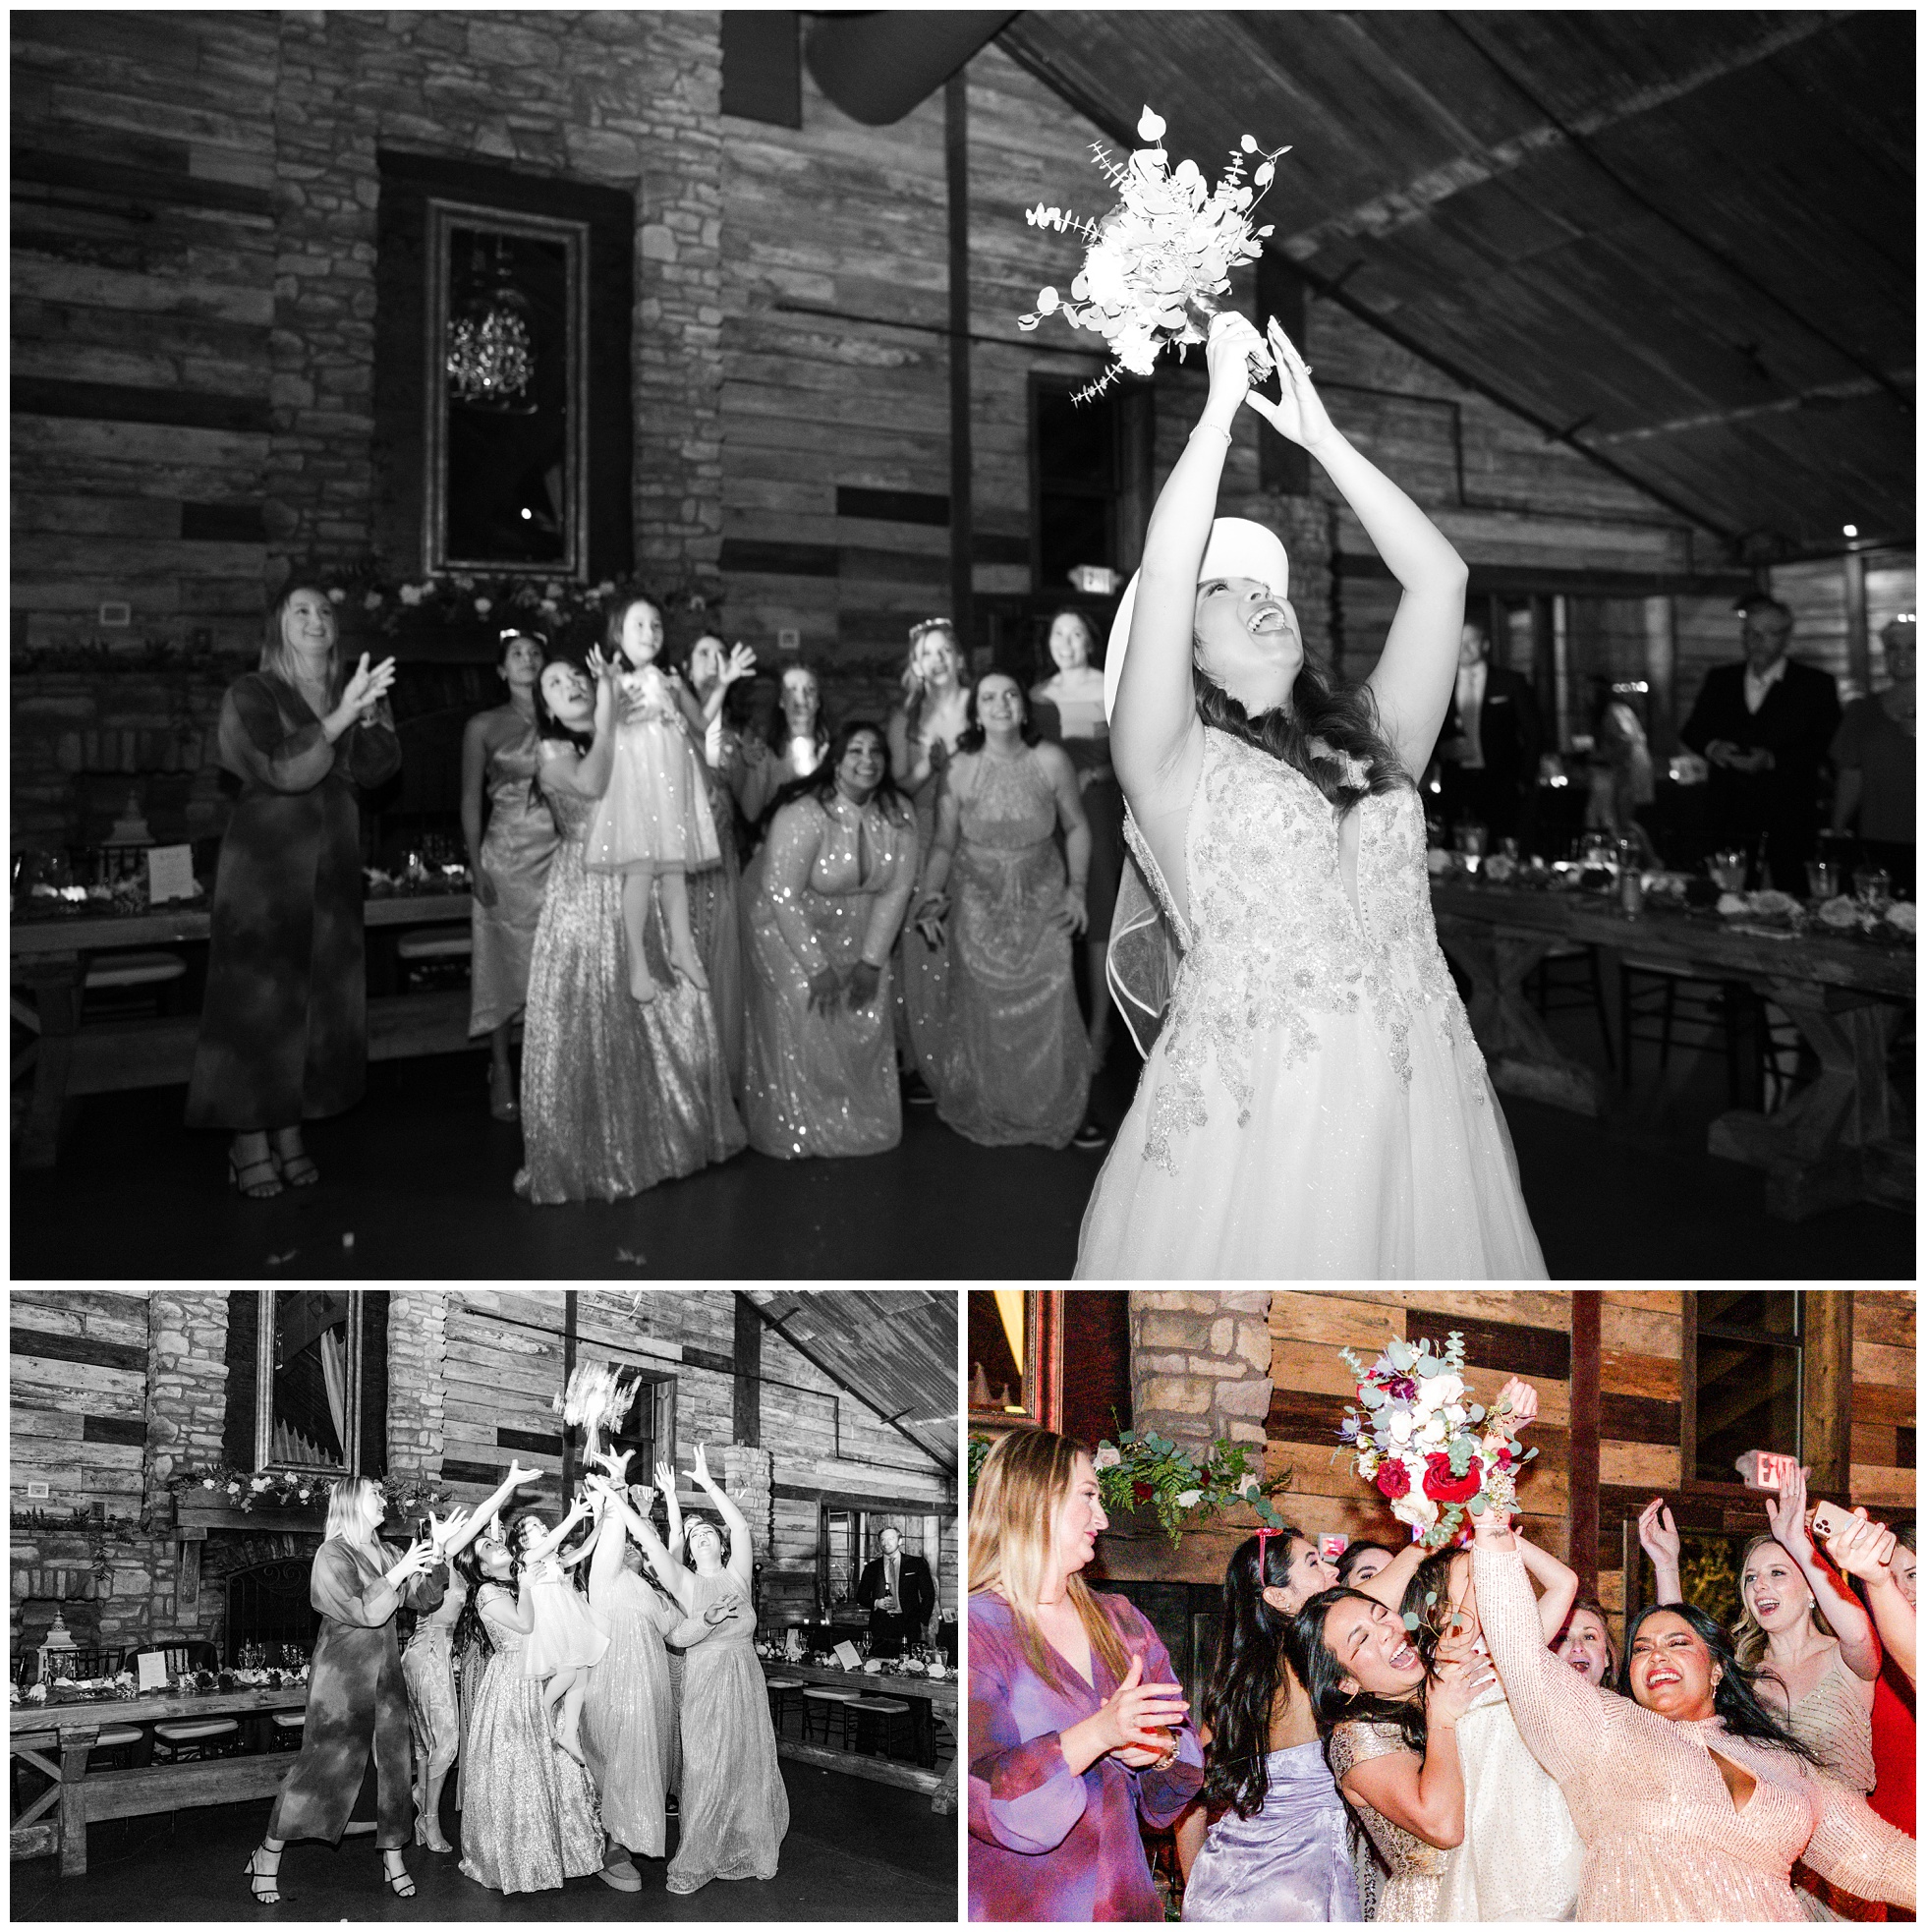 Bride tosses her bouquet to all the single ladies with excitement during wedding reception.